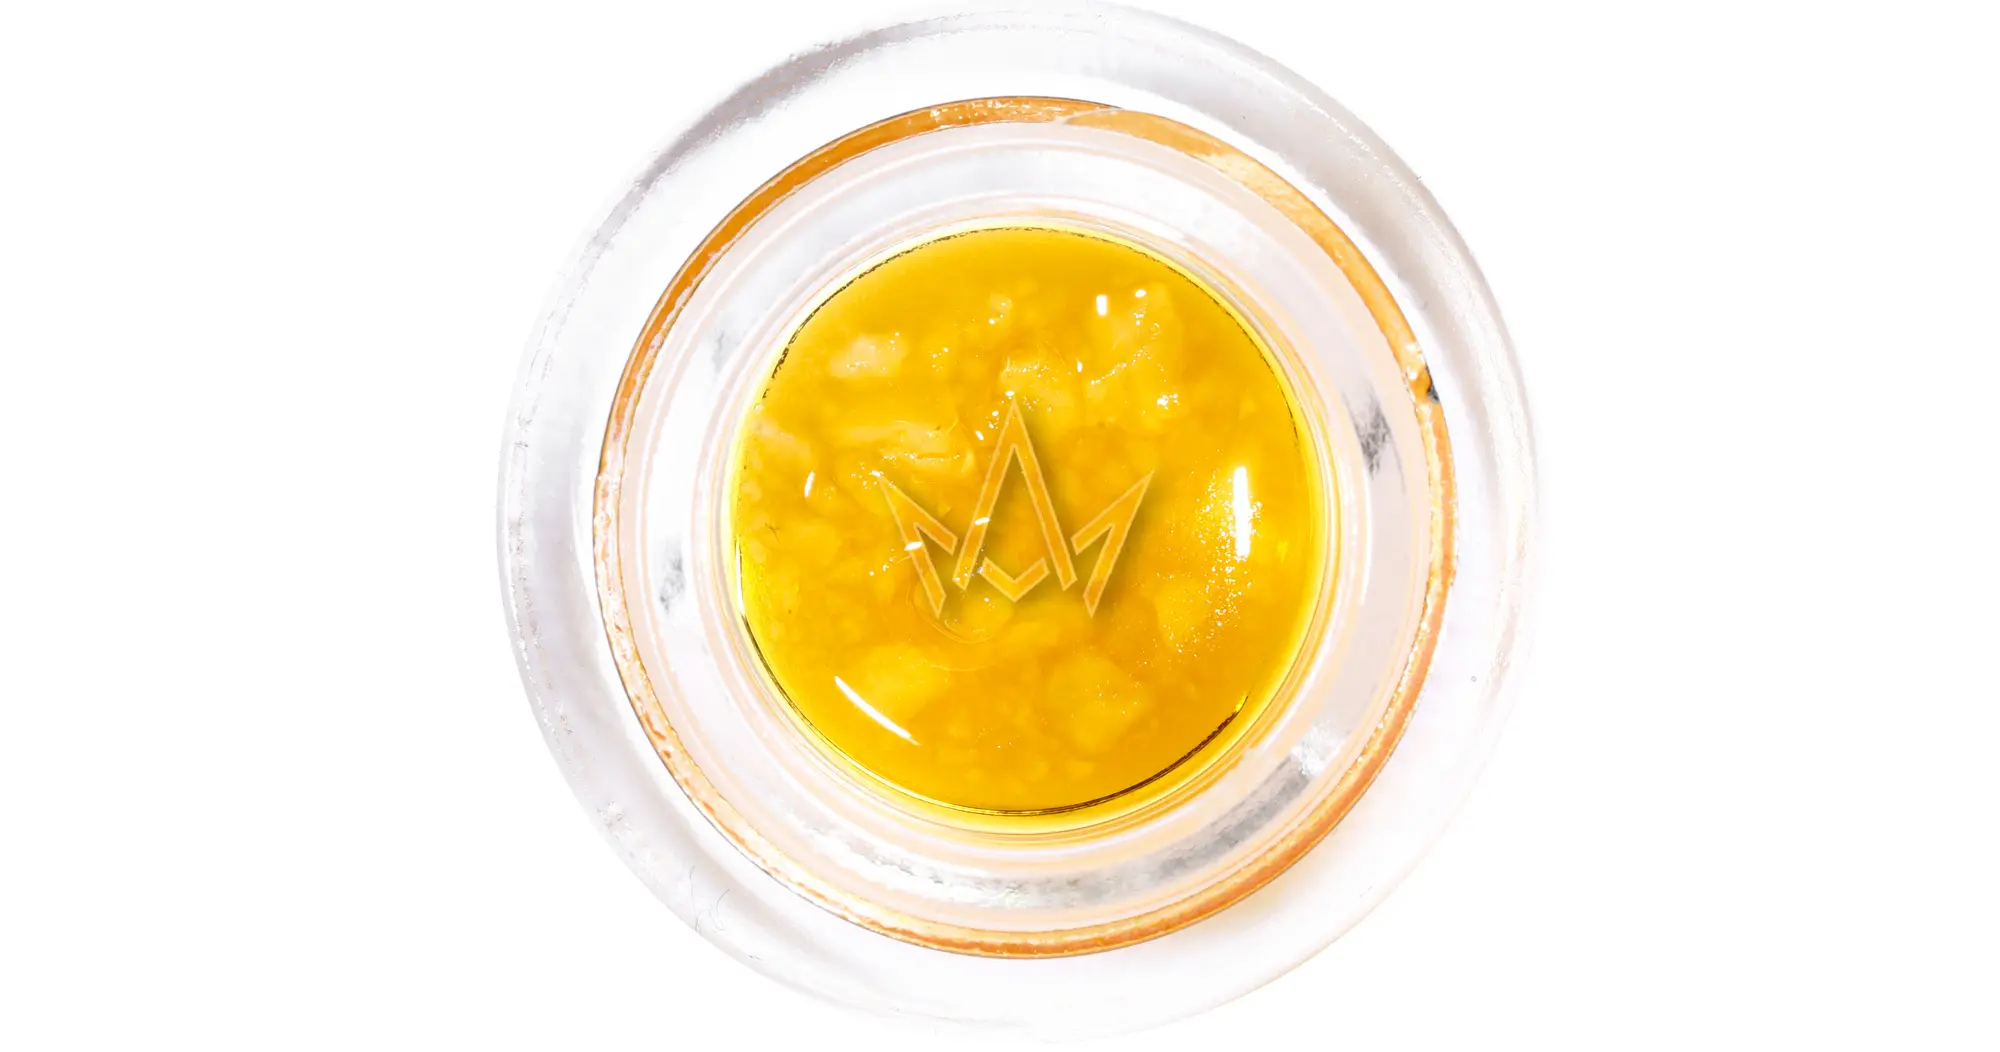 Blooberry Z Live Resin